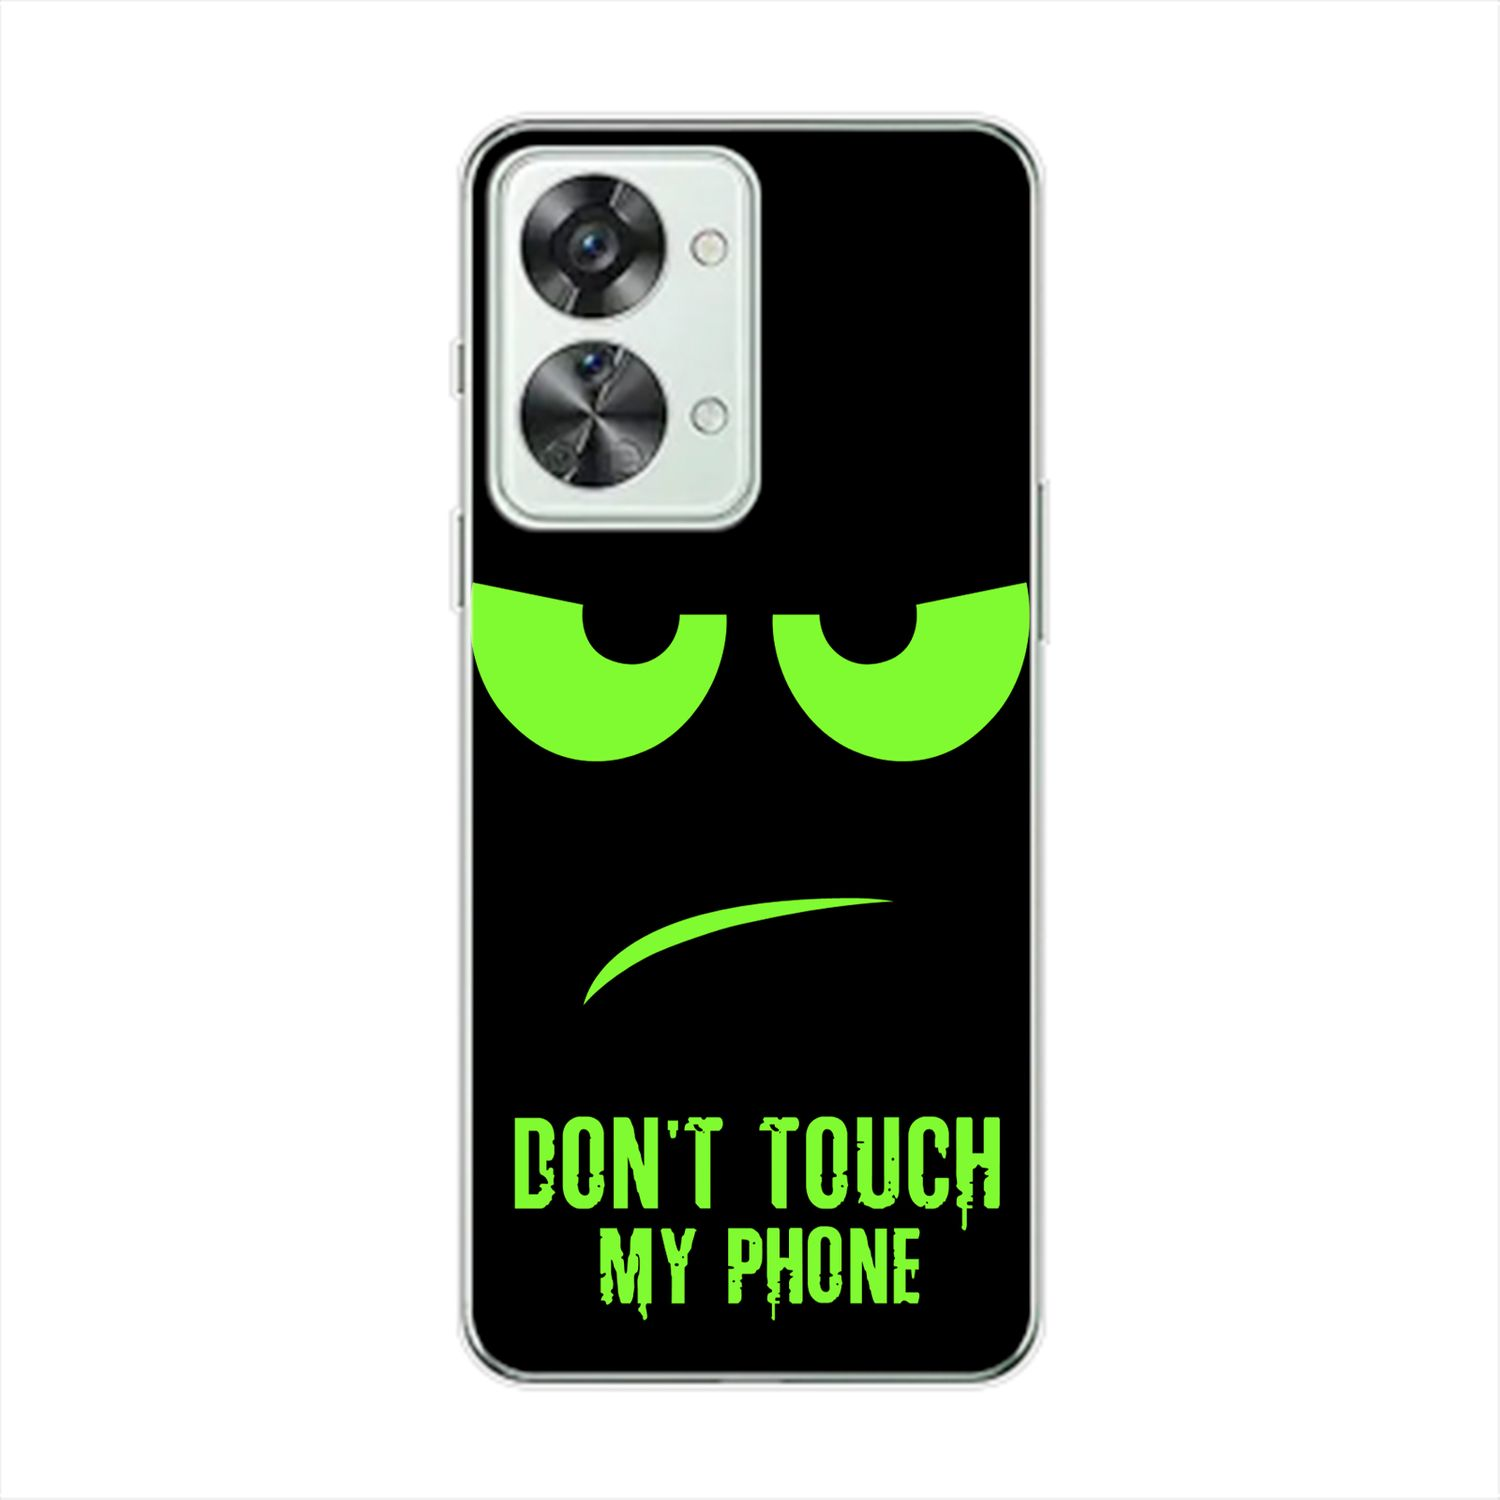 KÖNIG DESIGN Case, Backcover, Dont 2T, Phone Nord Touch Grün OnePlus, My